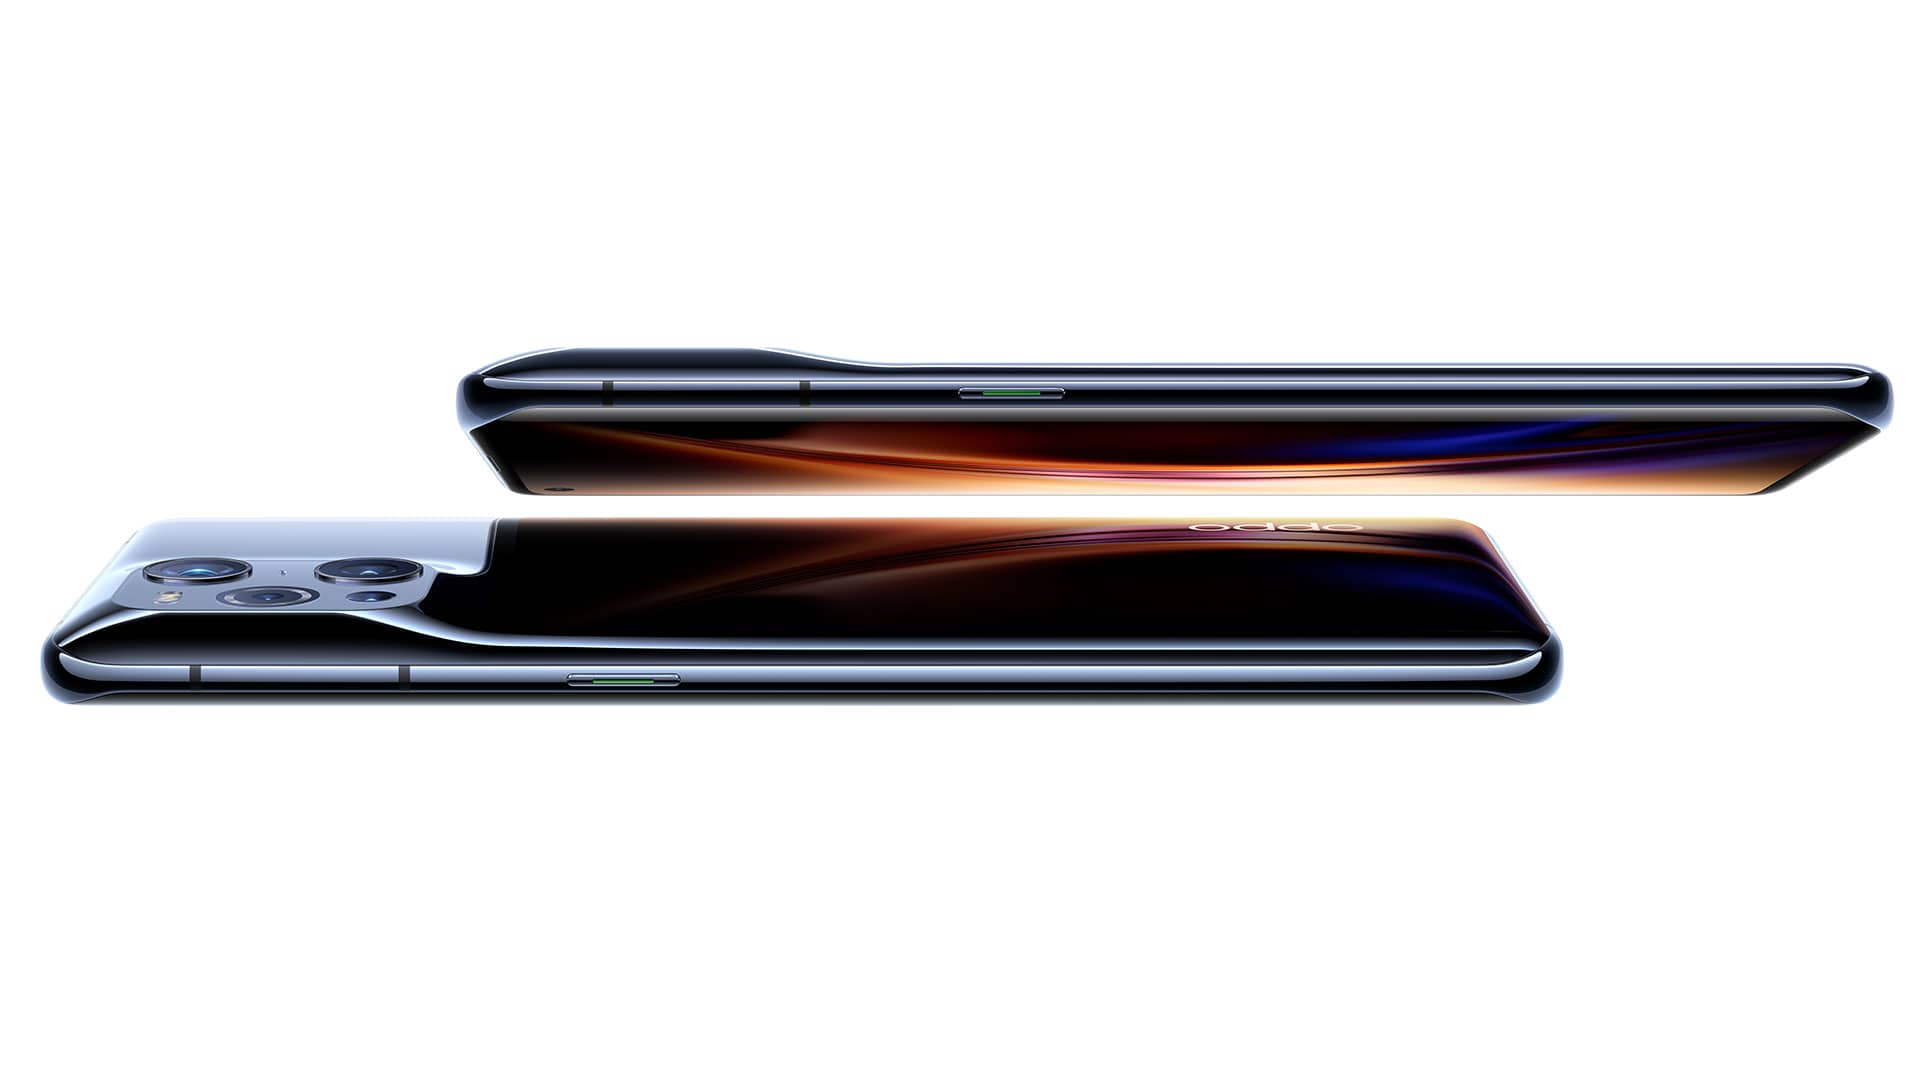 Launch Oppo Find X3 Pro: Specifications, price, features, availability